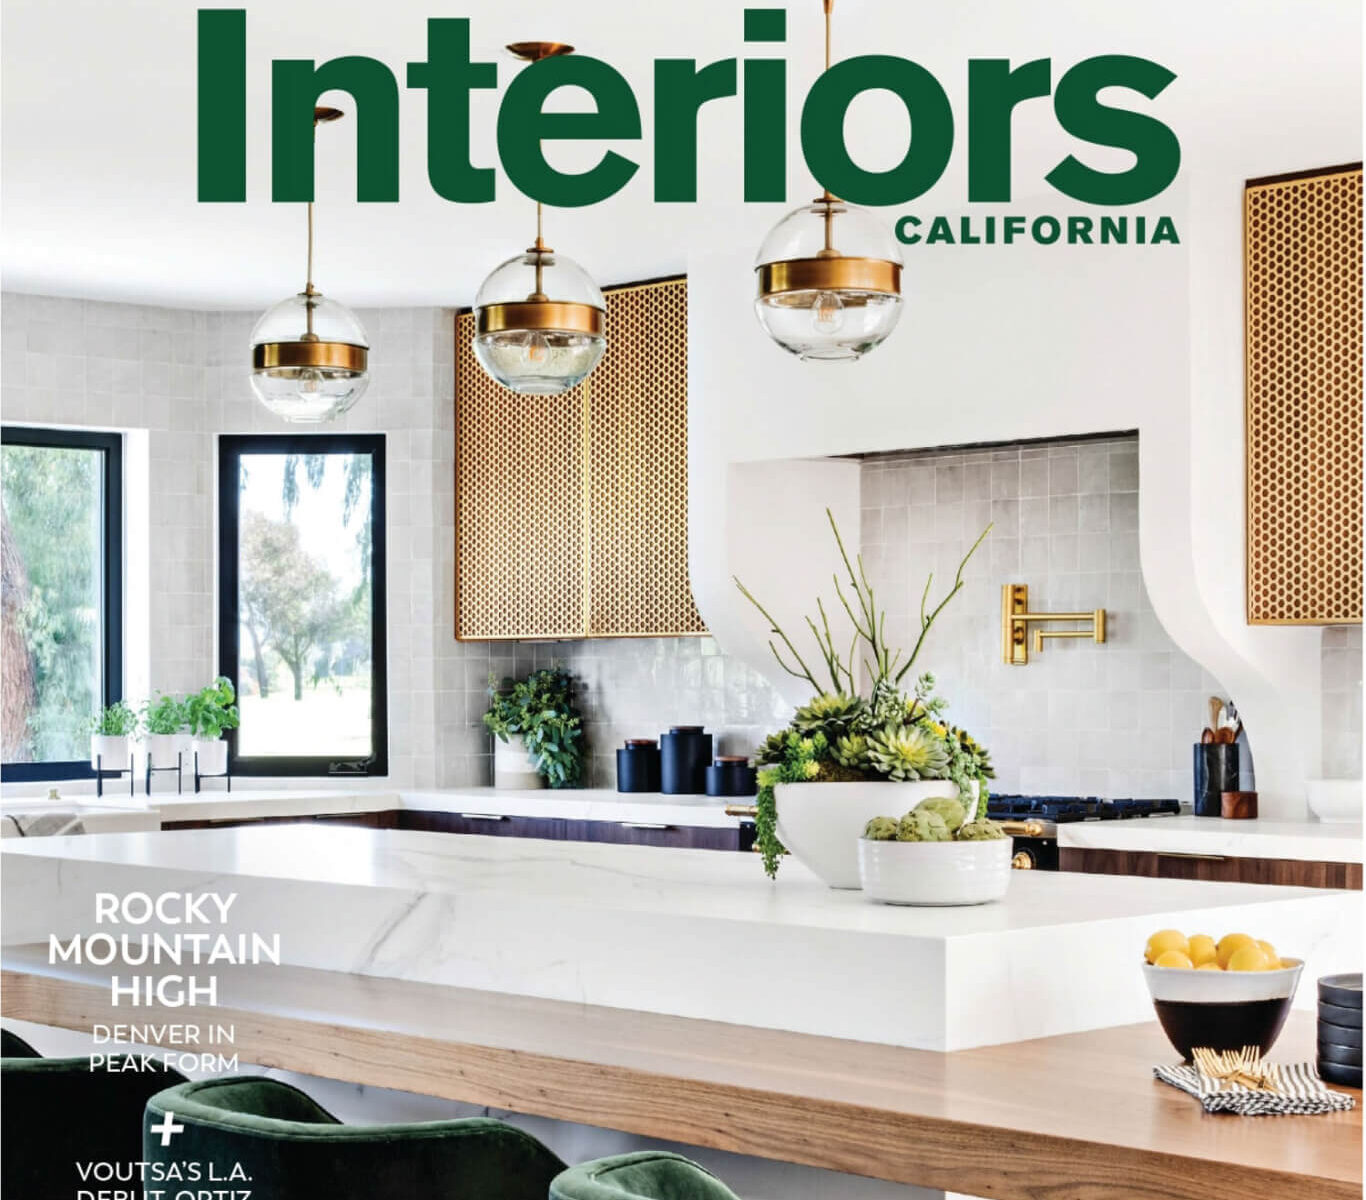 Cover of Modern Luxury Interiors California Magazine featuring our Seacliff Remodel project